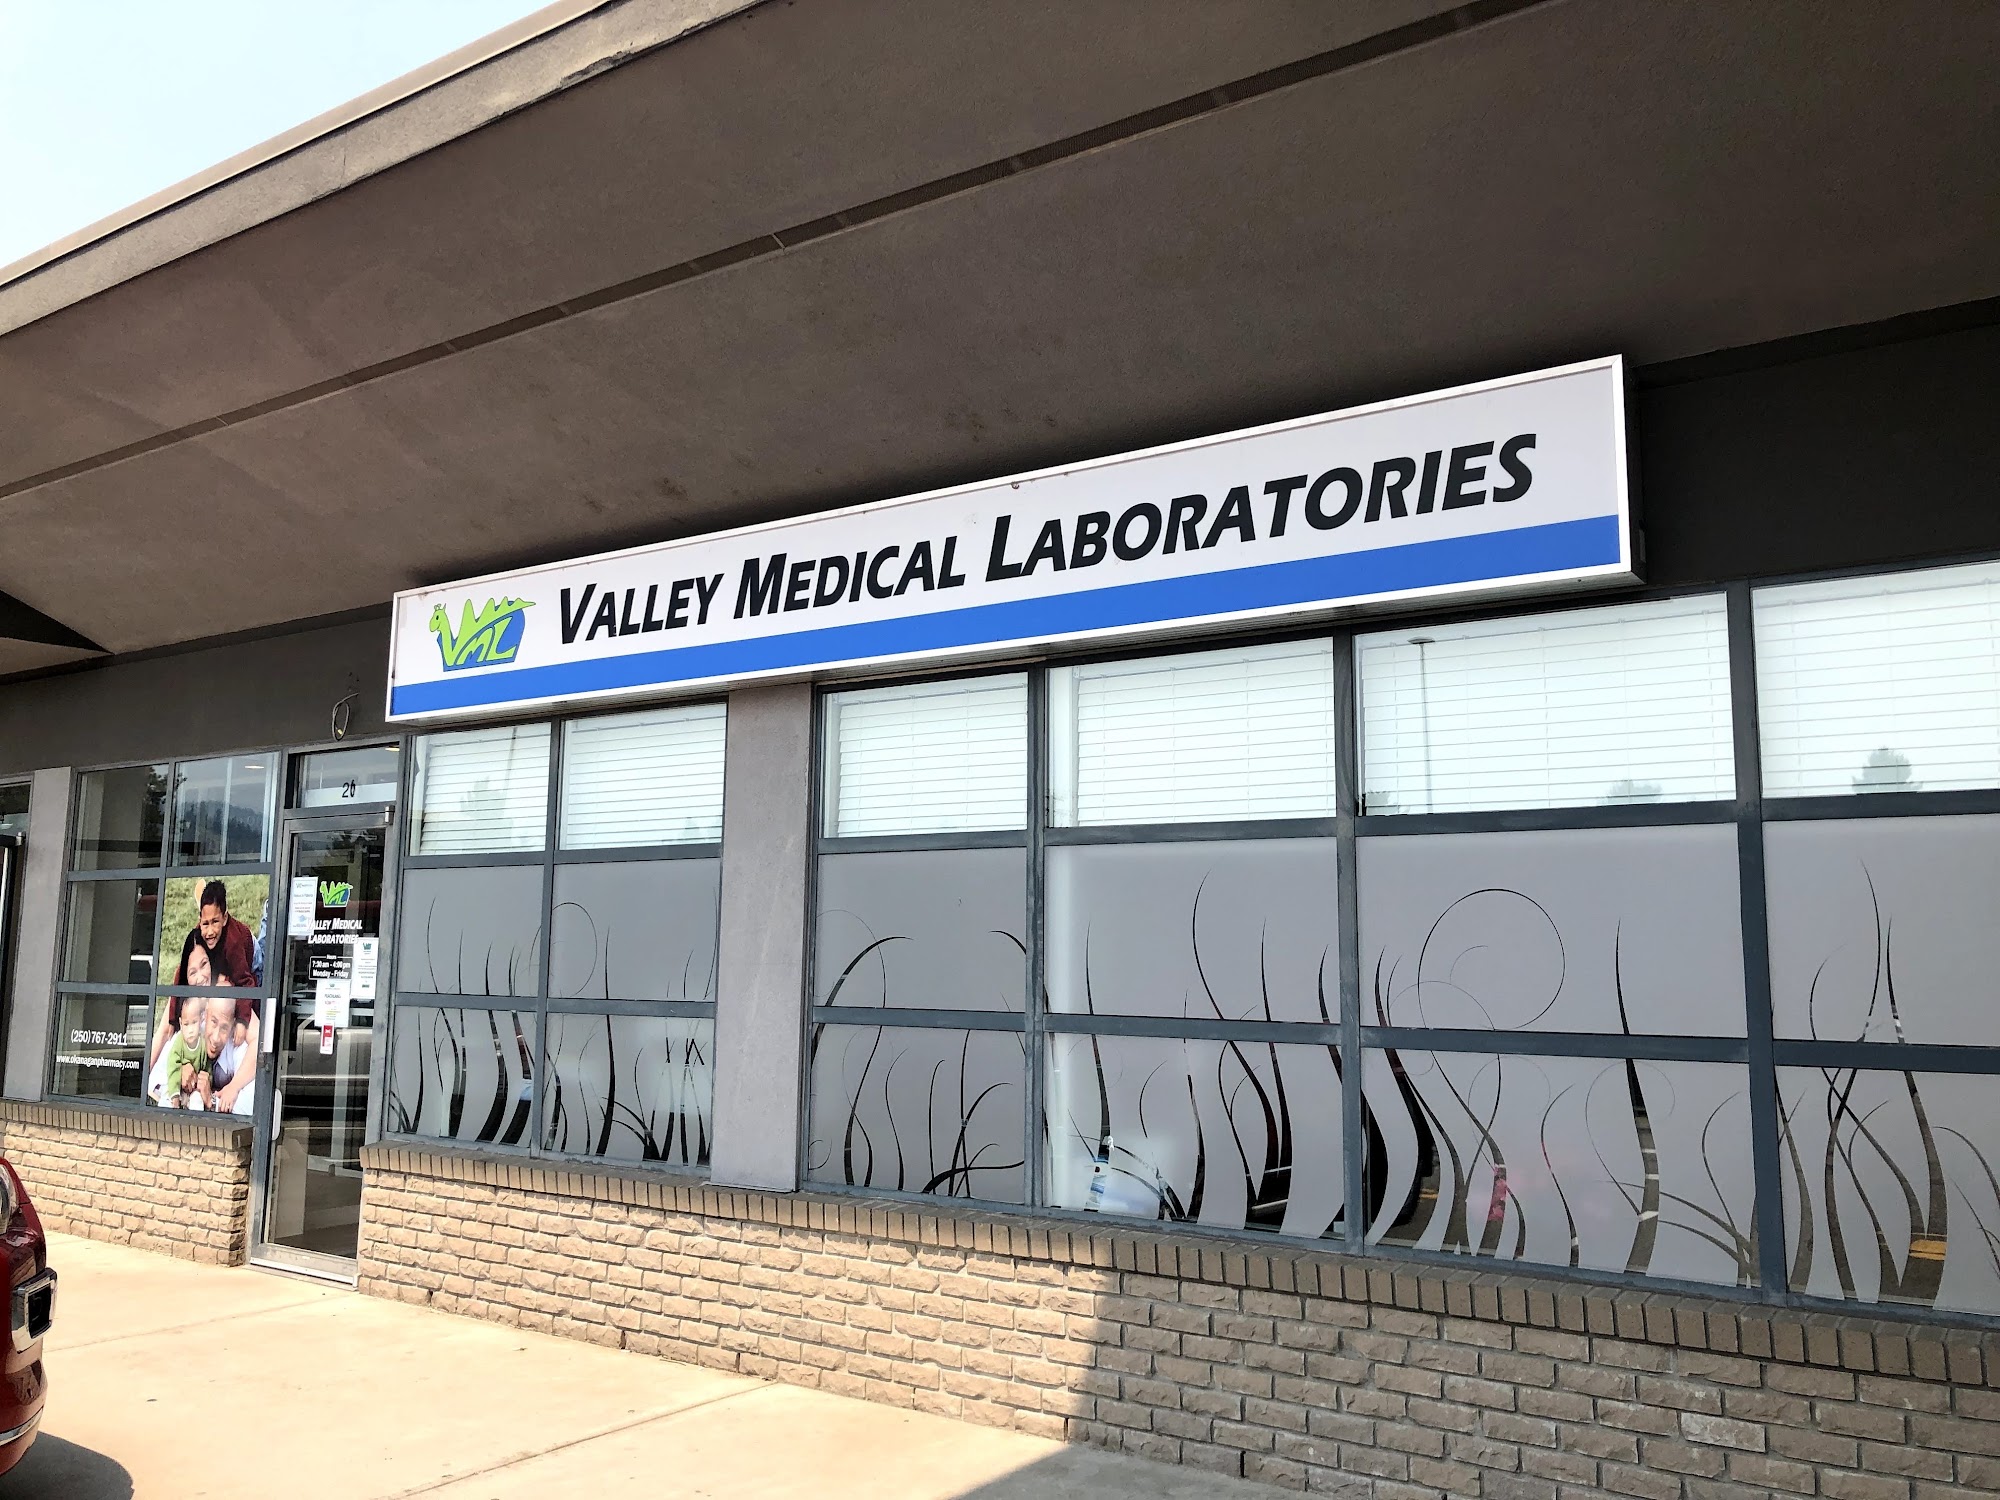 Valley Medical Laboratories 5500 Clements Cres #26, Peachland British Columbia V0H 1X5